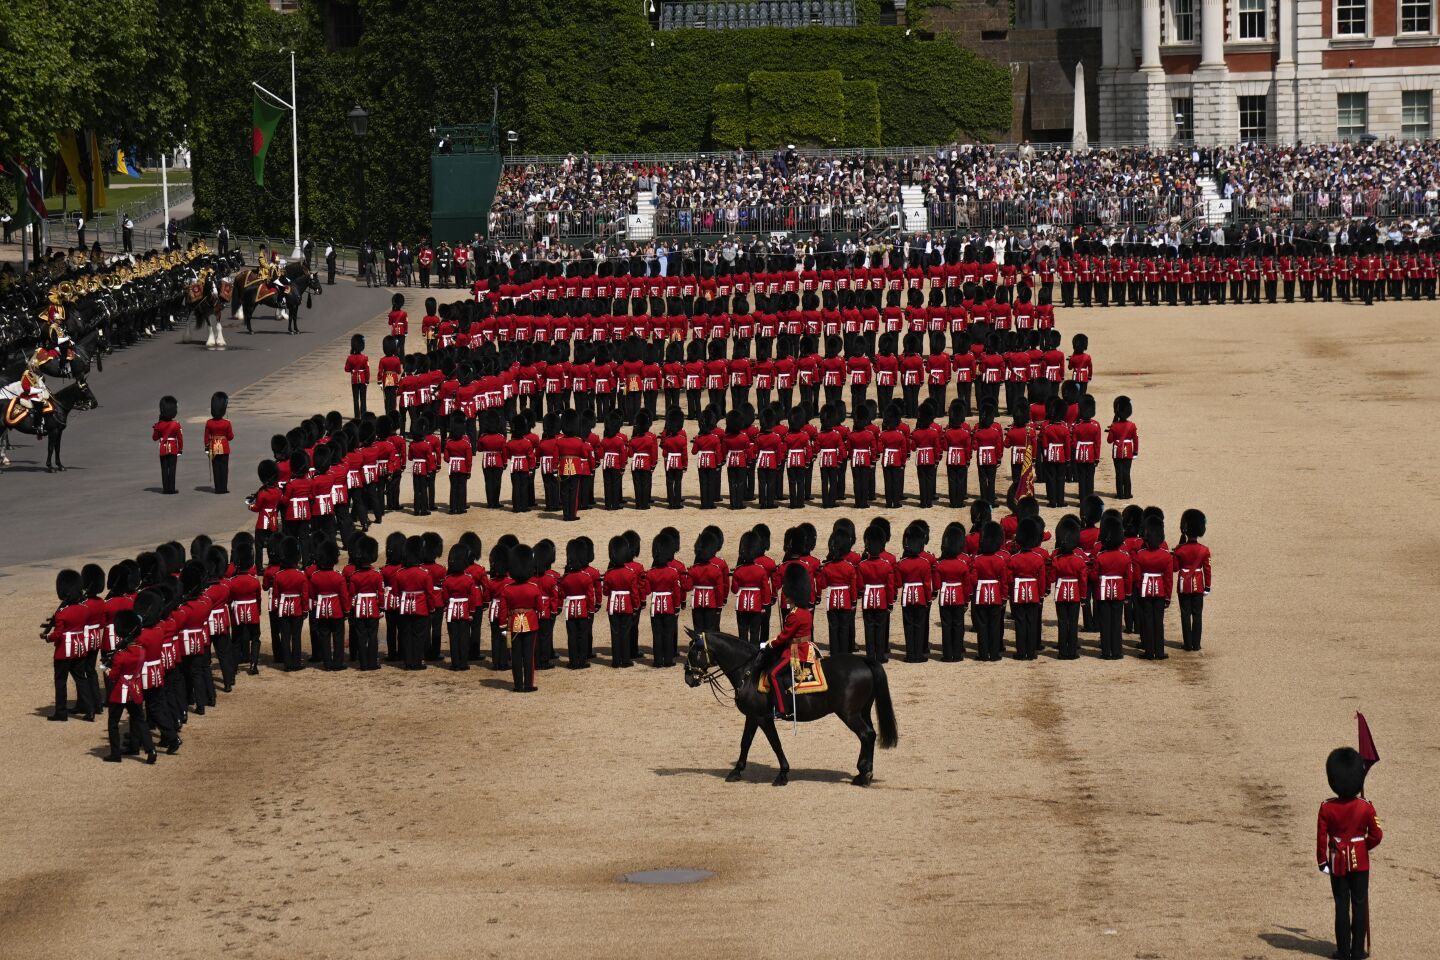 The queen's guards march during the Trooping the Color parade.